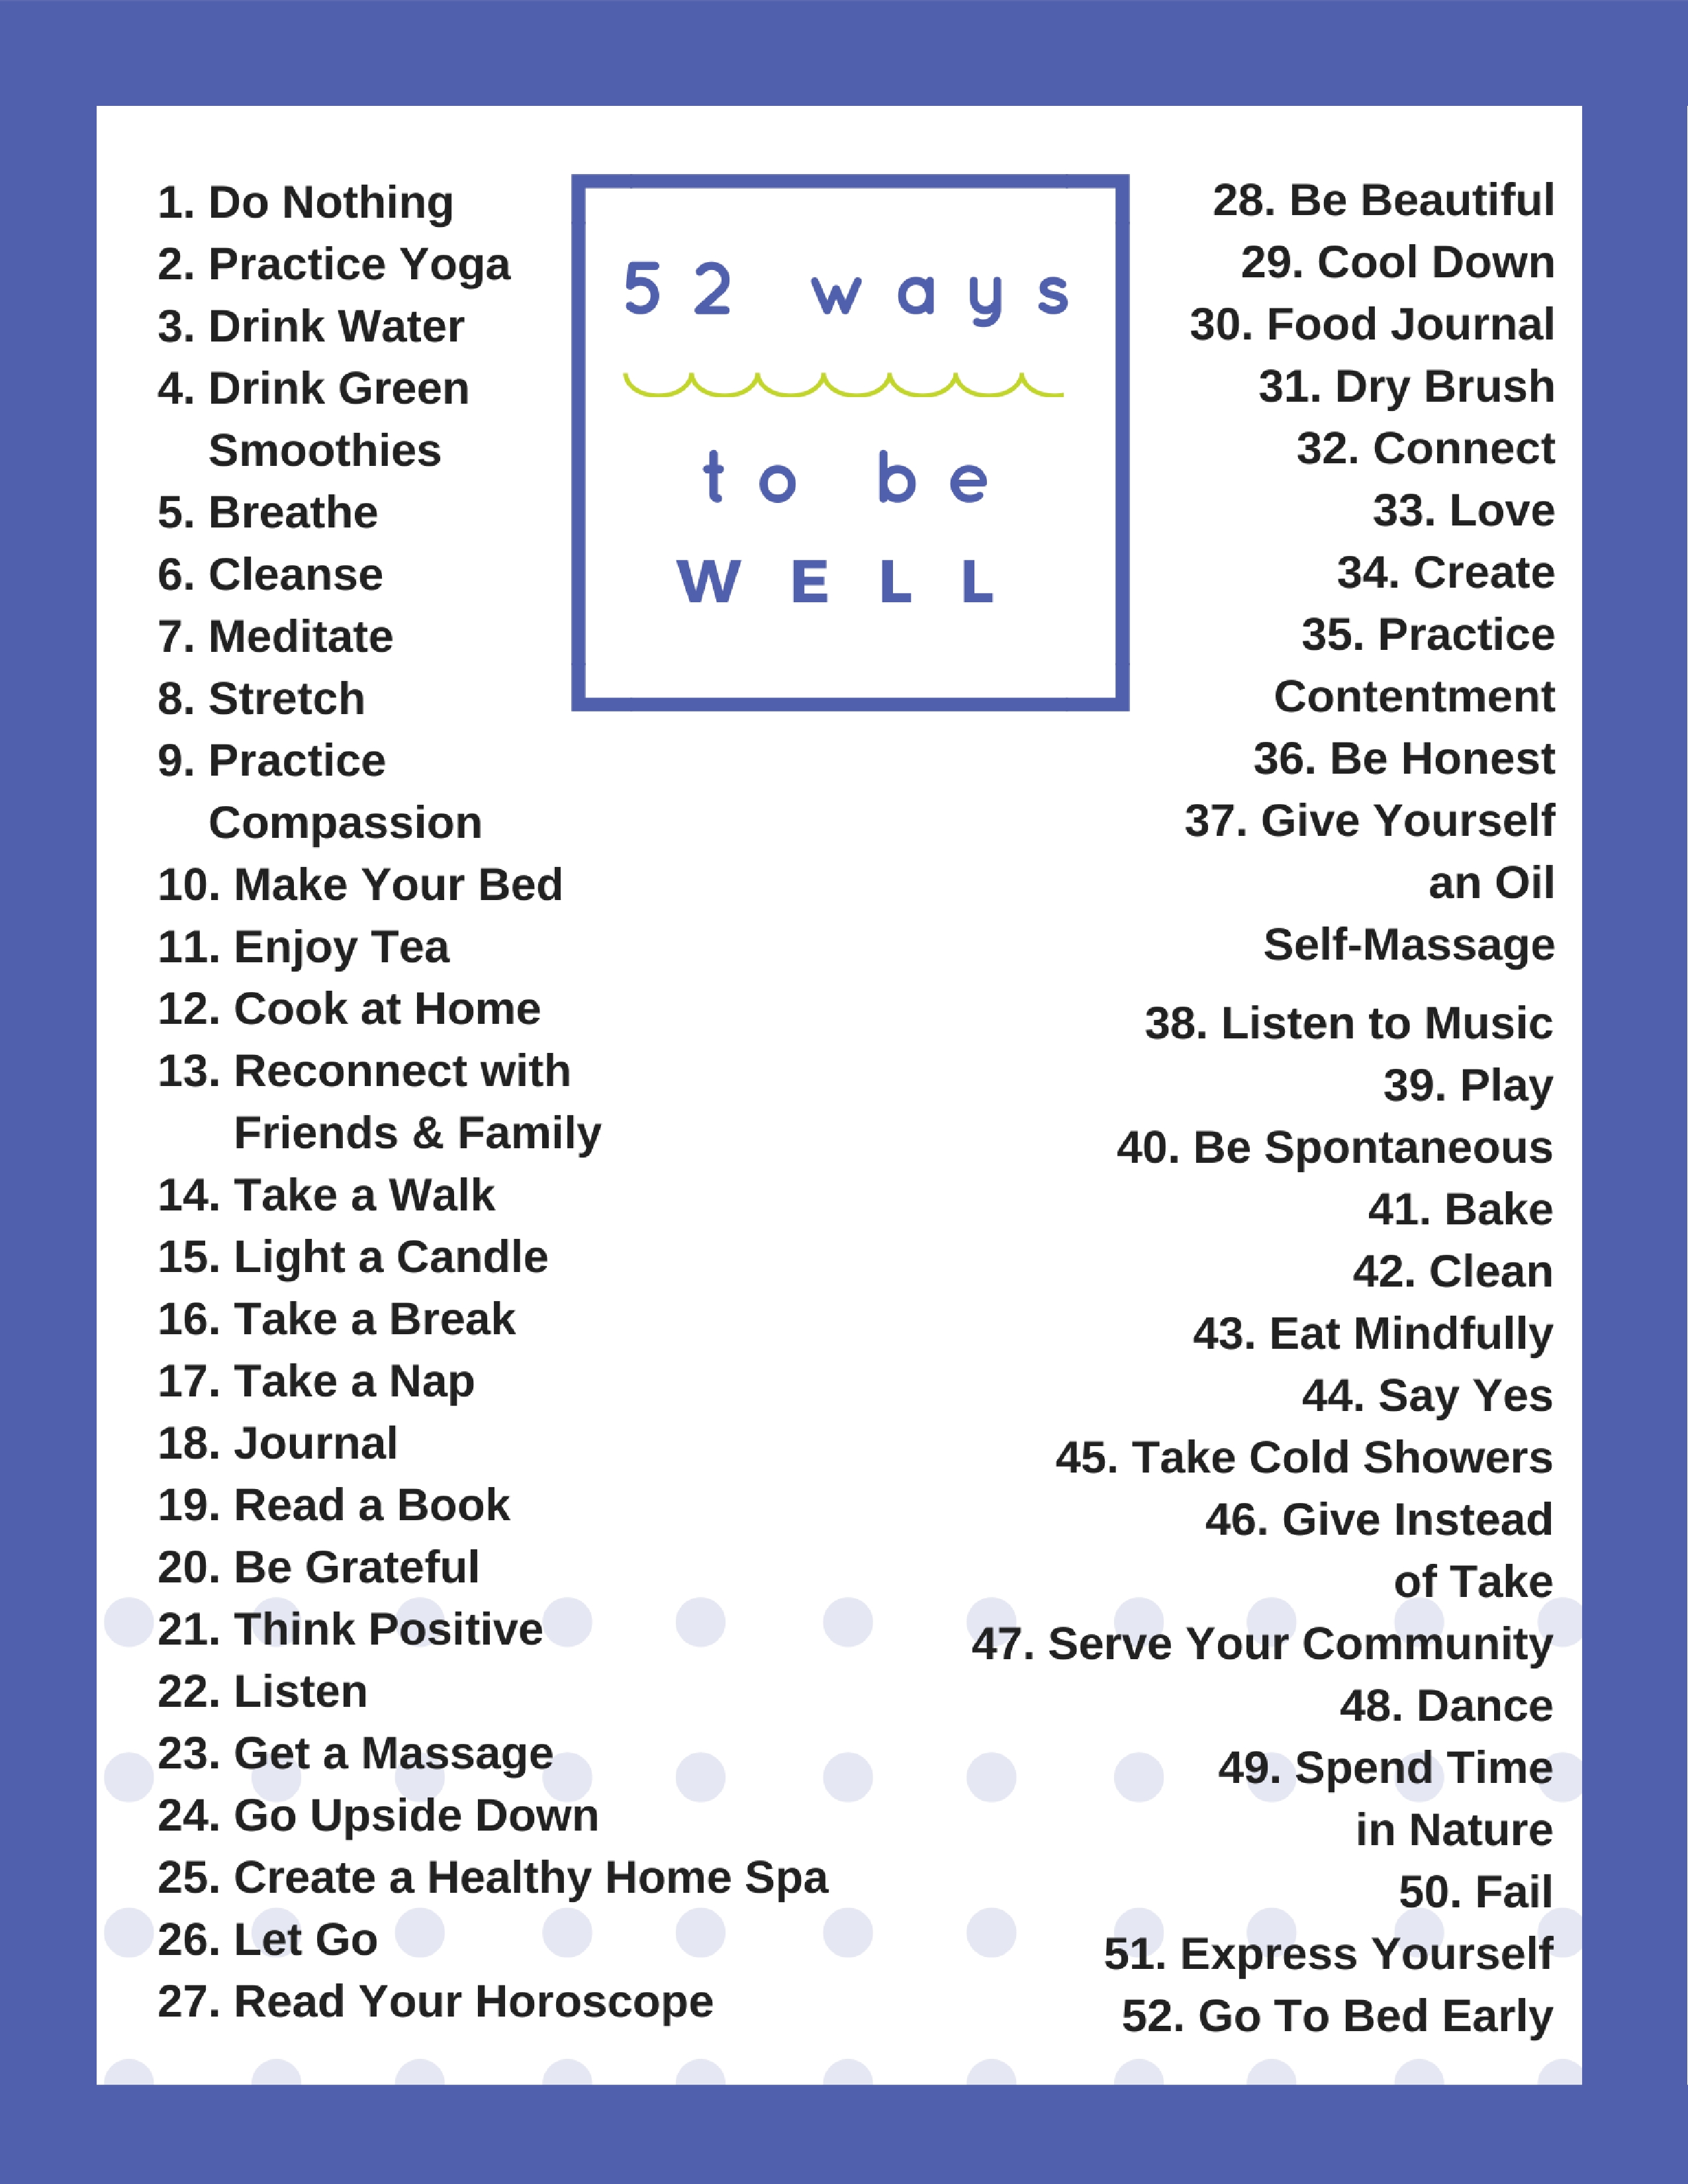 52 ways to be well